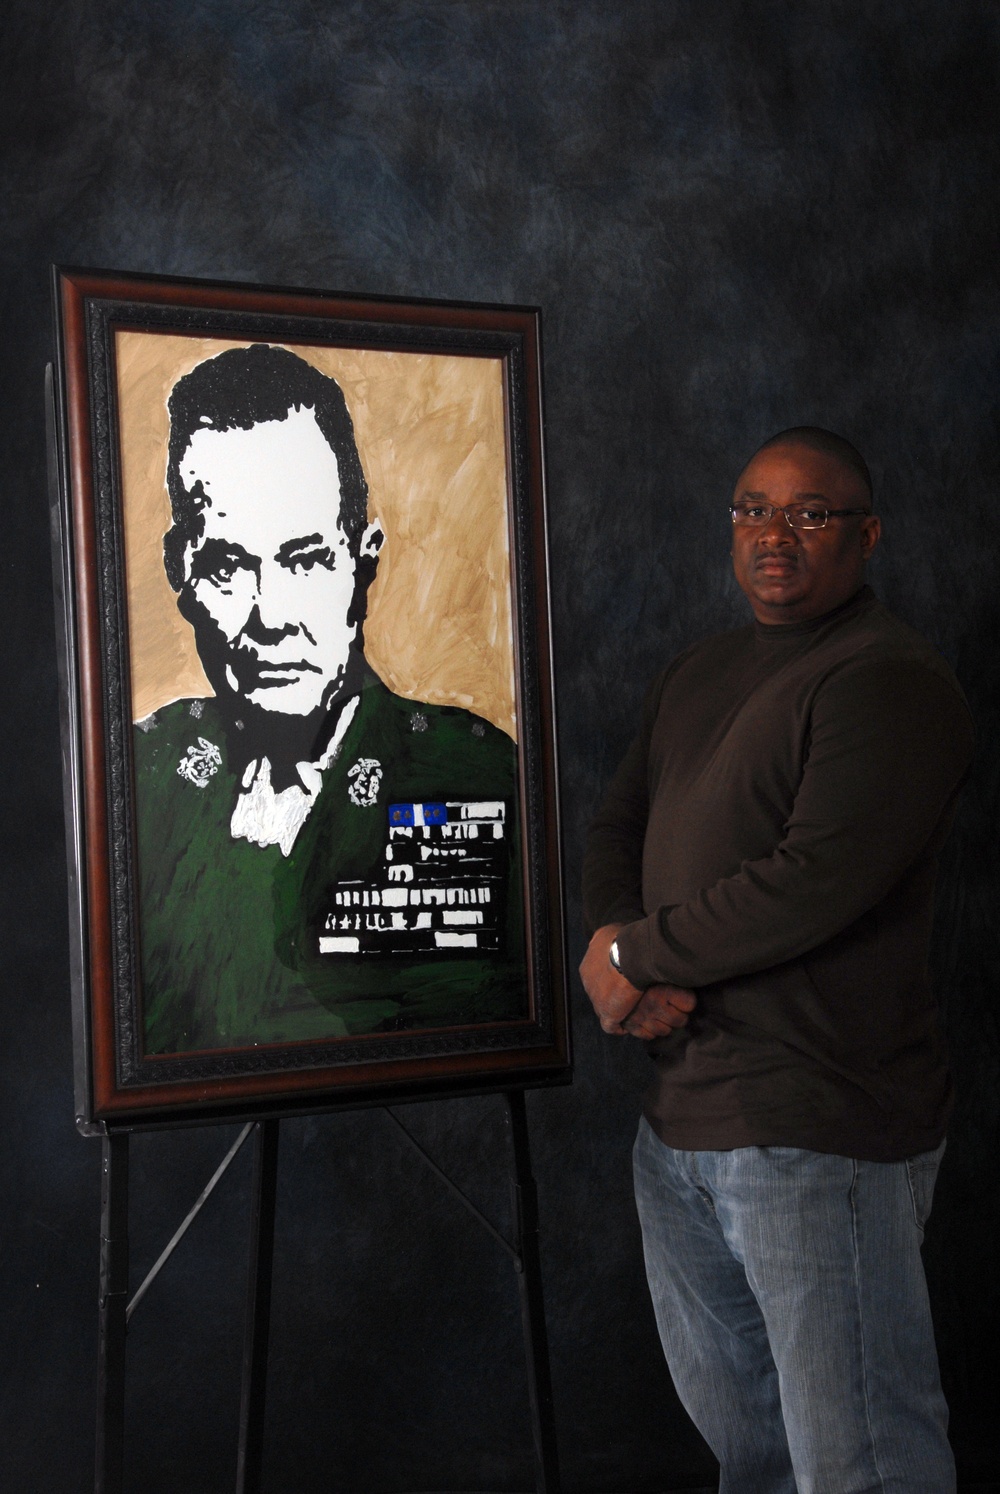 The Art of War: base employee, former Marine finds solace in painting